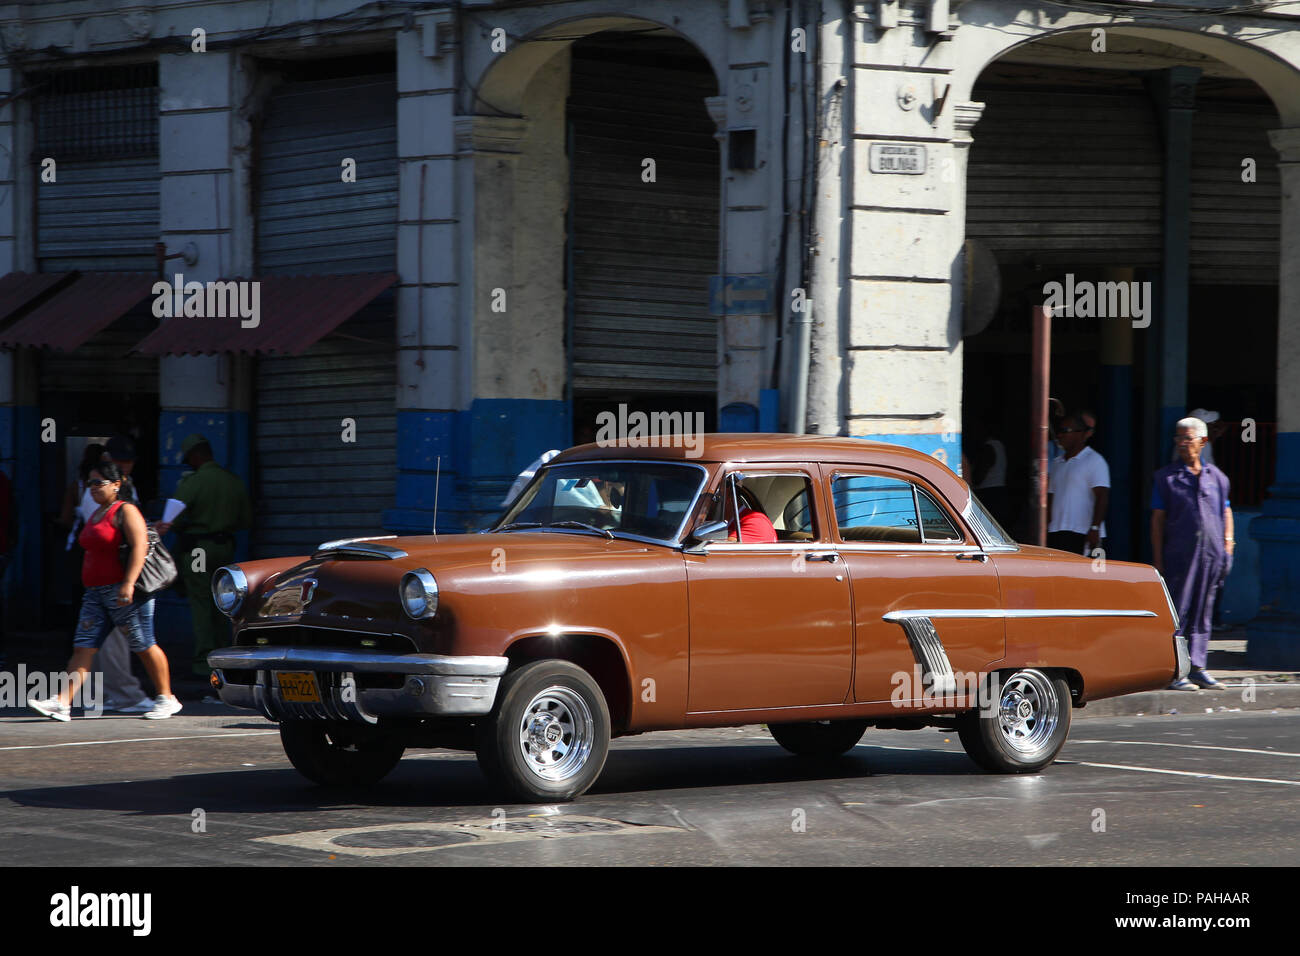 HAVANA - FEBRUARY 24: Classic American Mercury car on February 24, 2011 in Havana. Recent change in law allows the Cubans to trade cars again. Old law Stock Photo